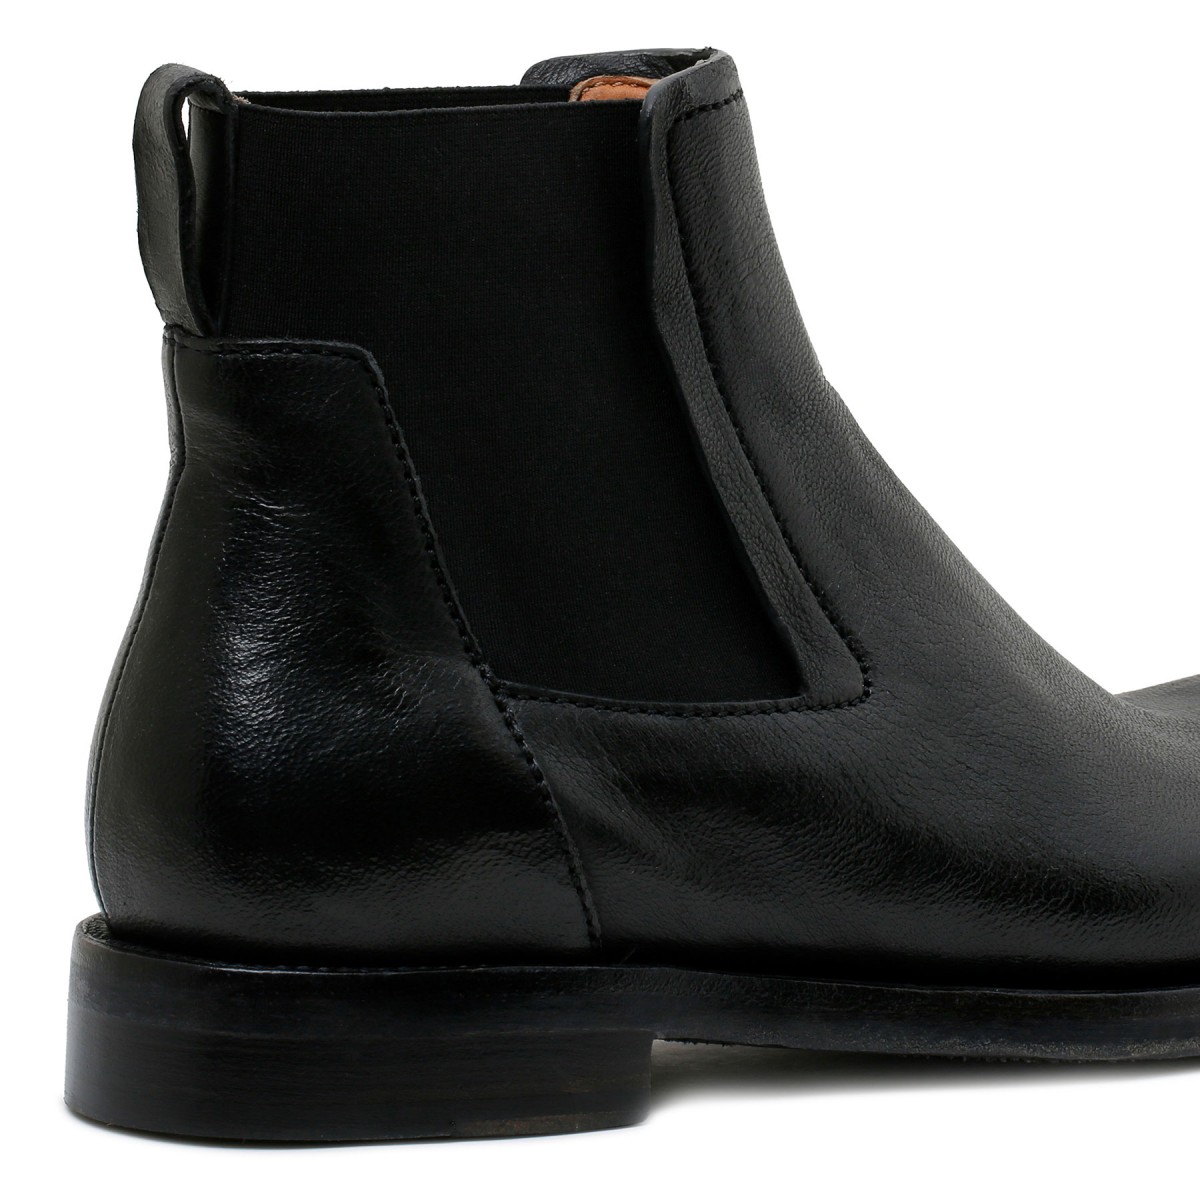 Black leather ankle boots